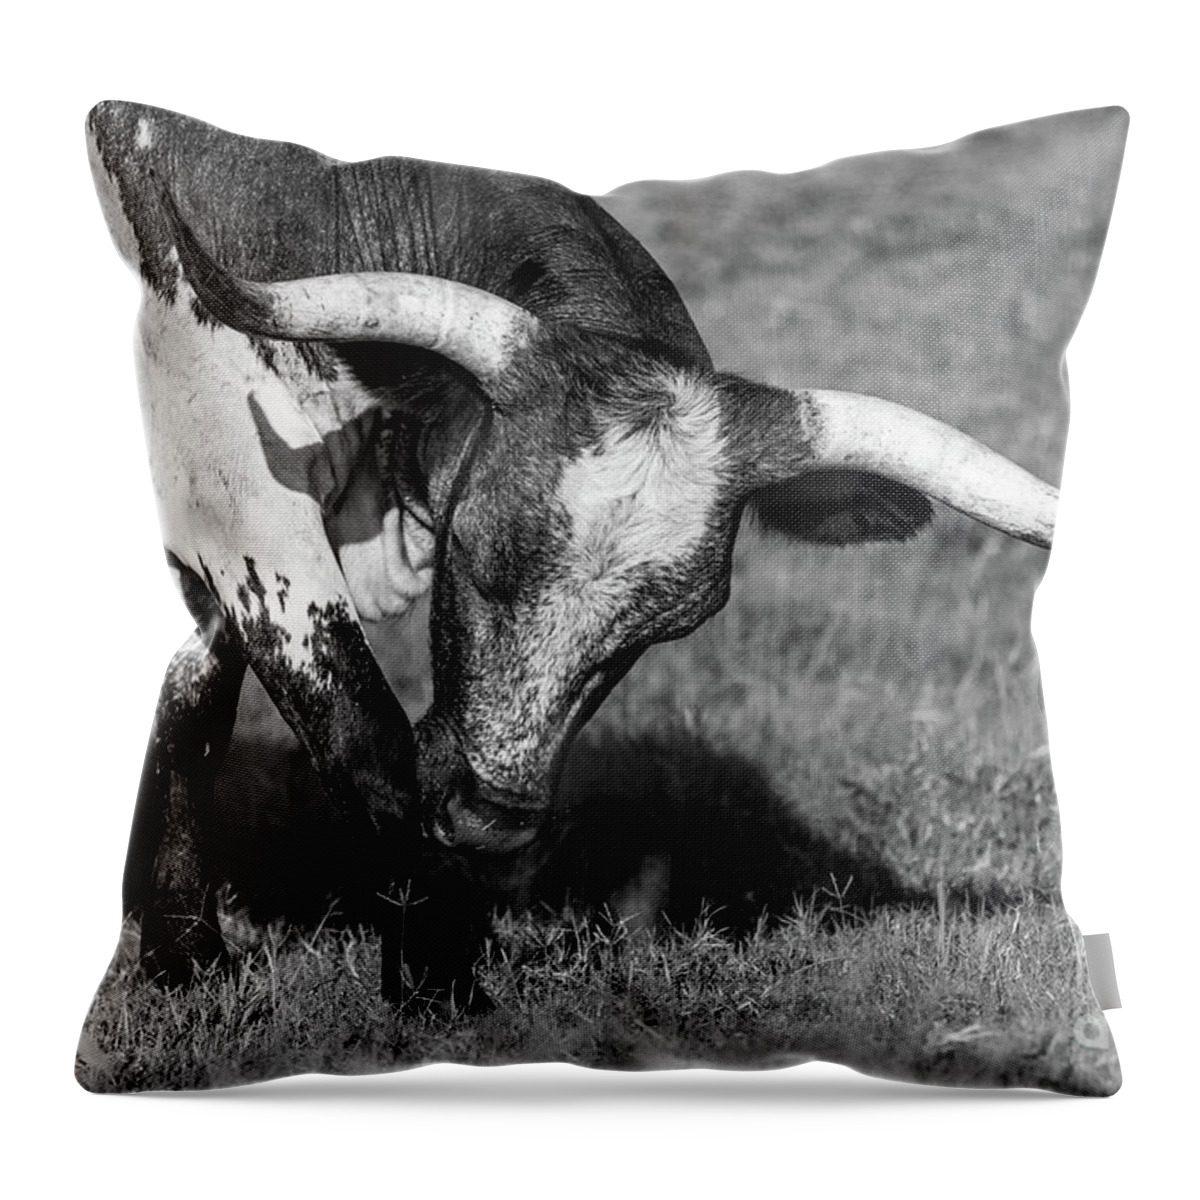  Throw Pillow featuring the photograph Longhorn by Vincent Bonafede